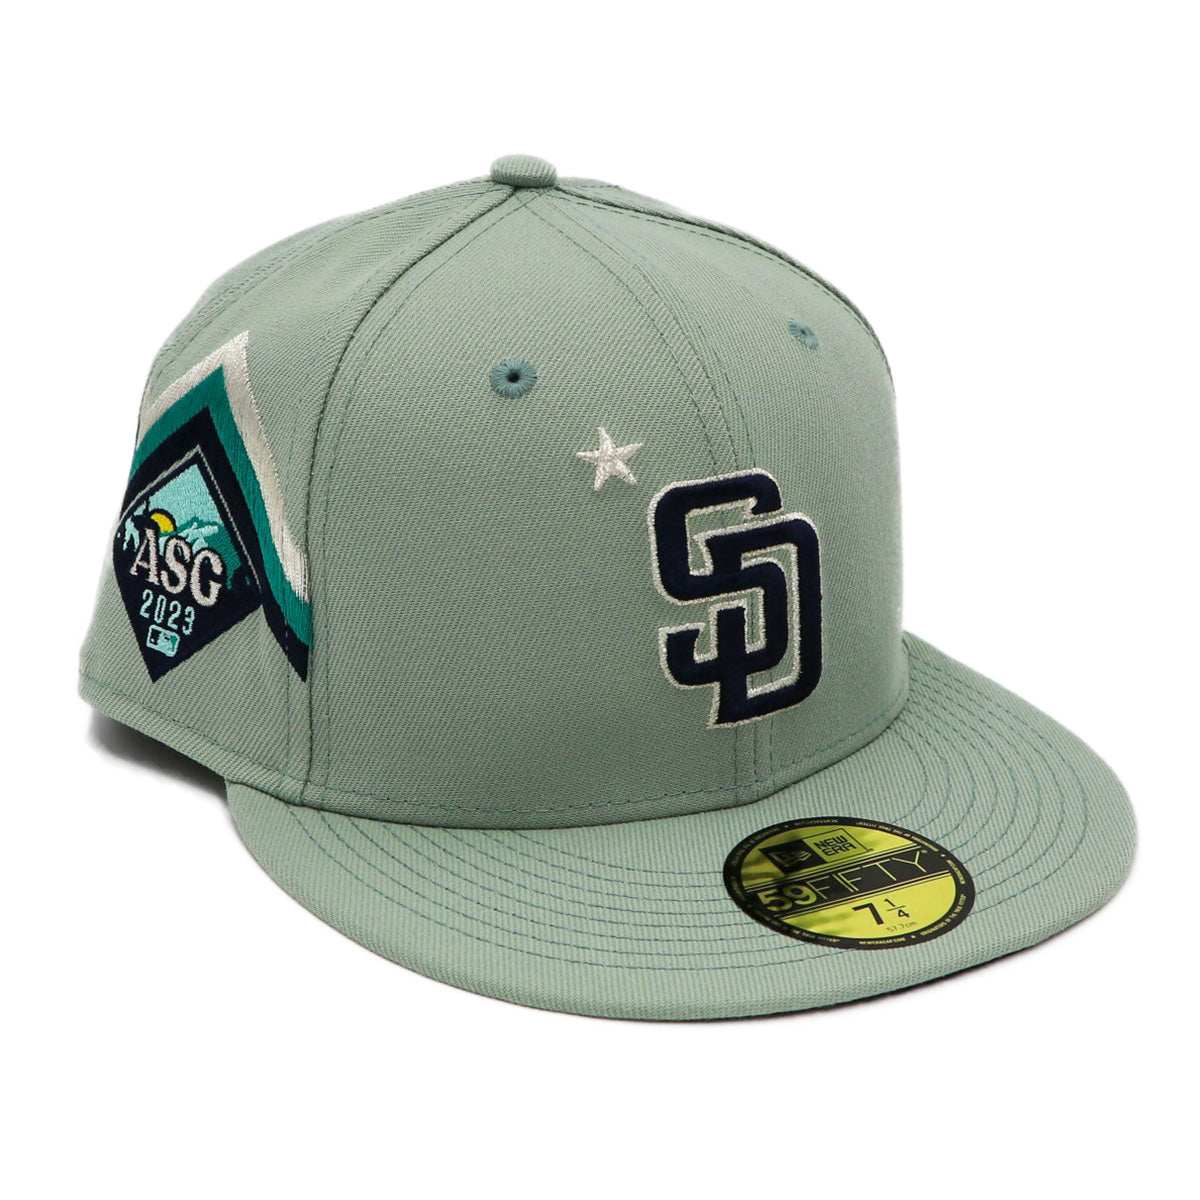 New Era 59FIFTY San Diego Padres ASG '23 Mint Fitted Hat 71/2